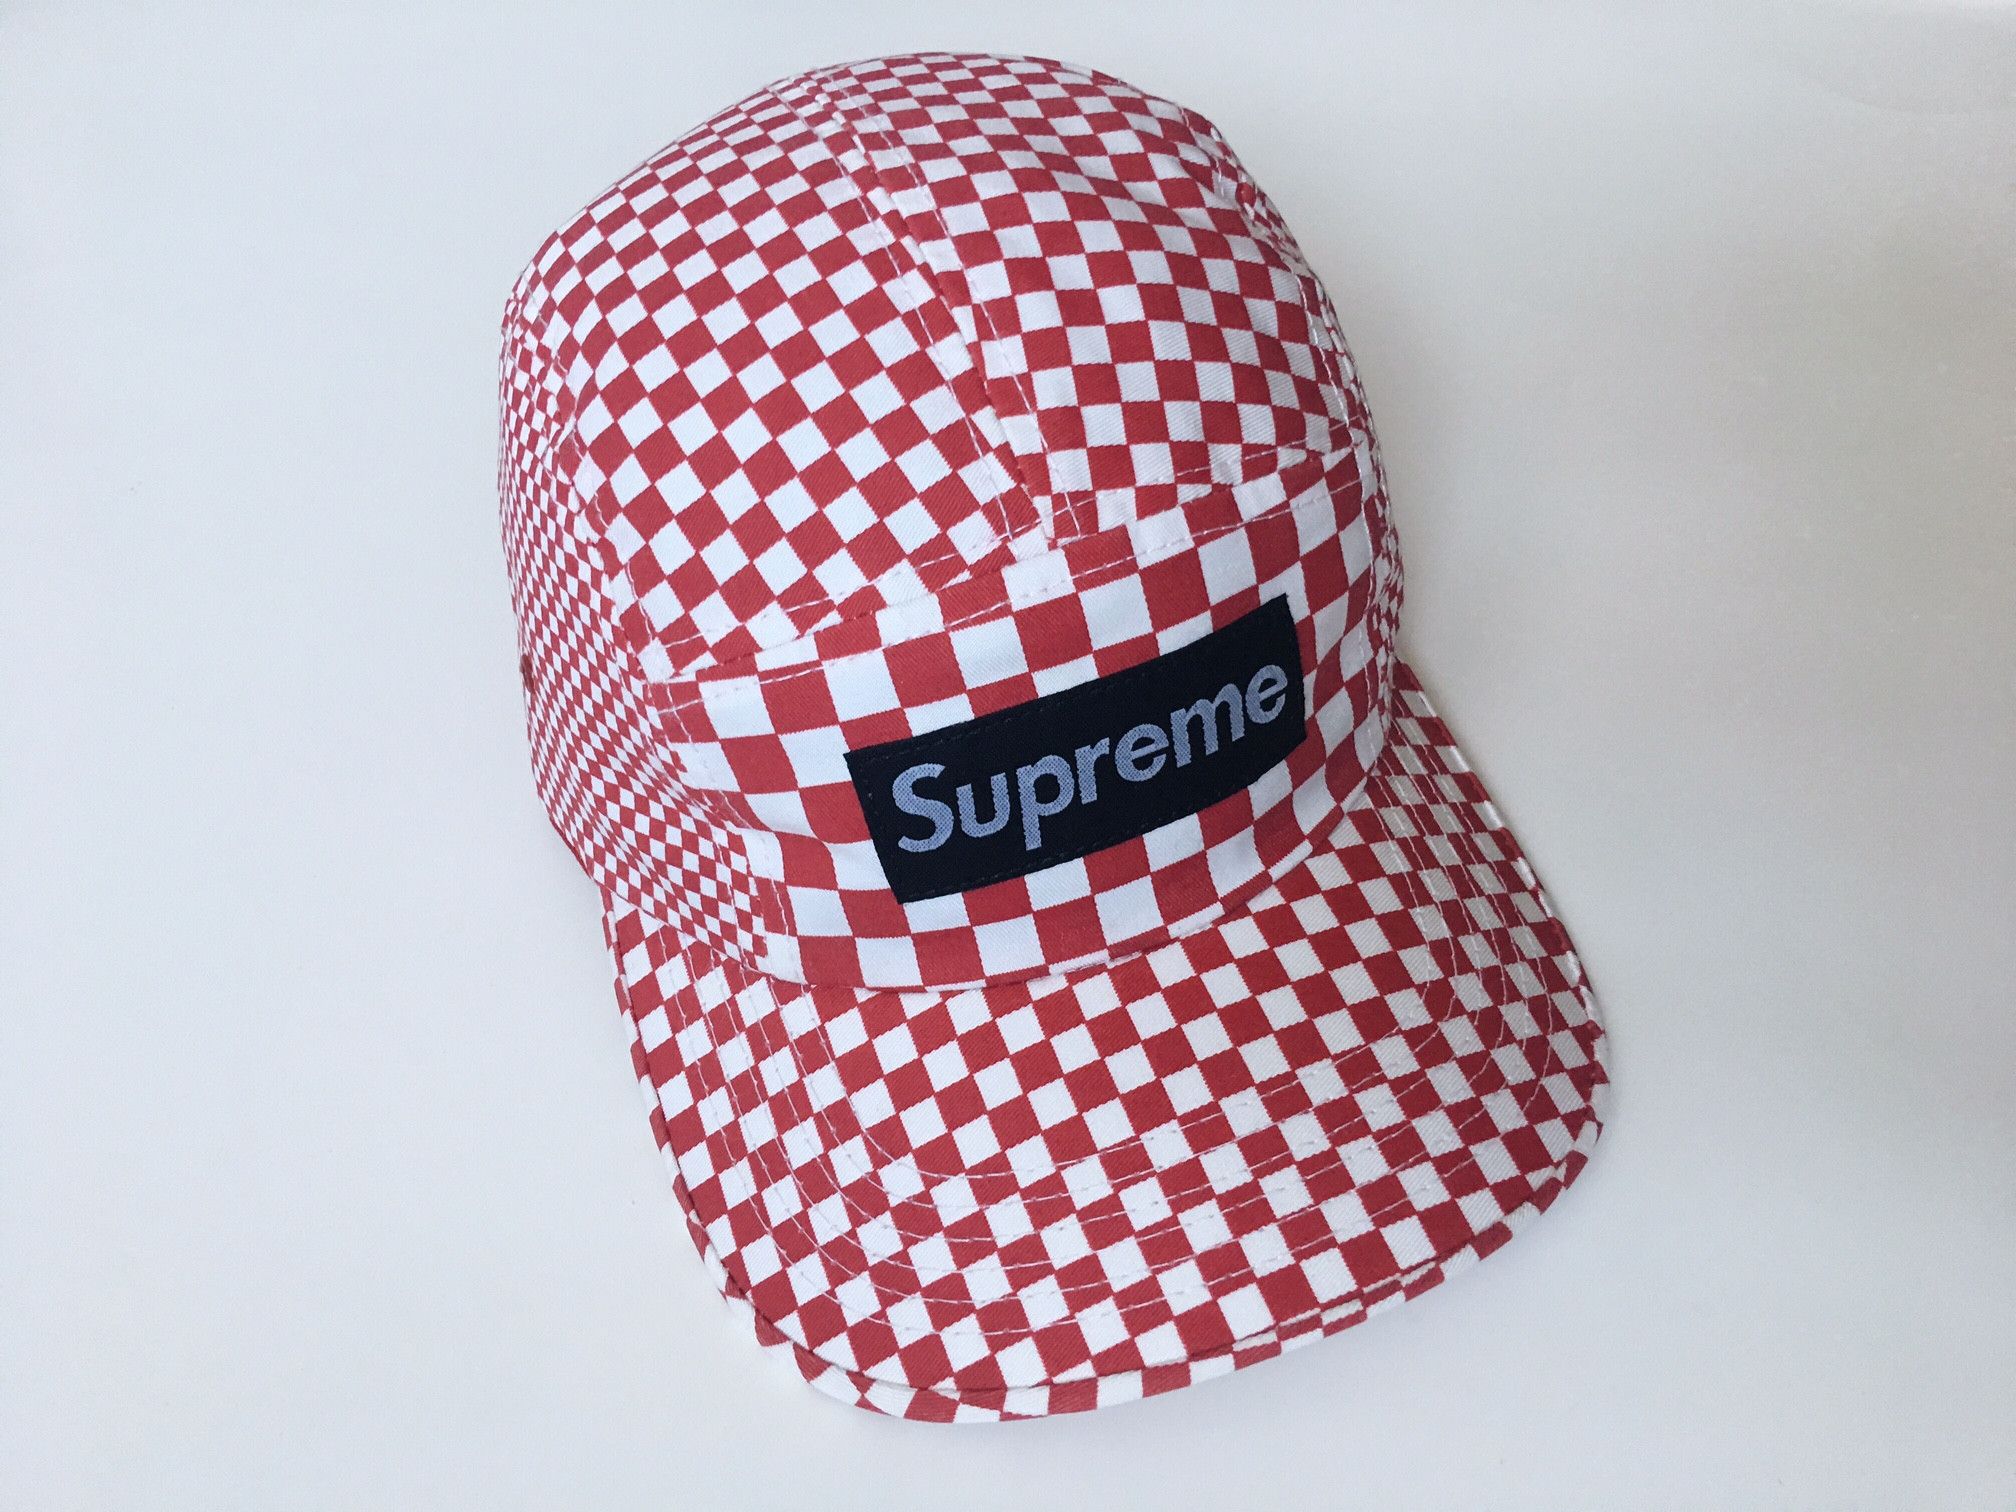 Buy Supreme Side Panel Camp Cap 'Red' - FW18H28 RED - Red